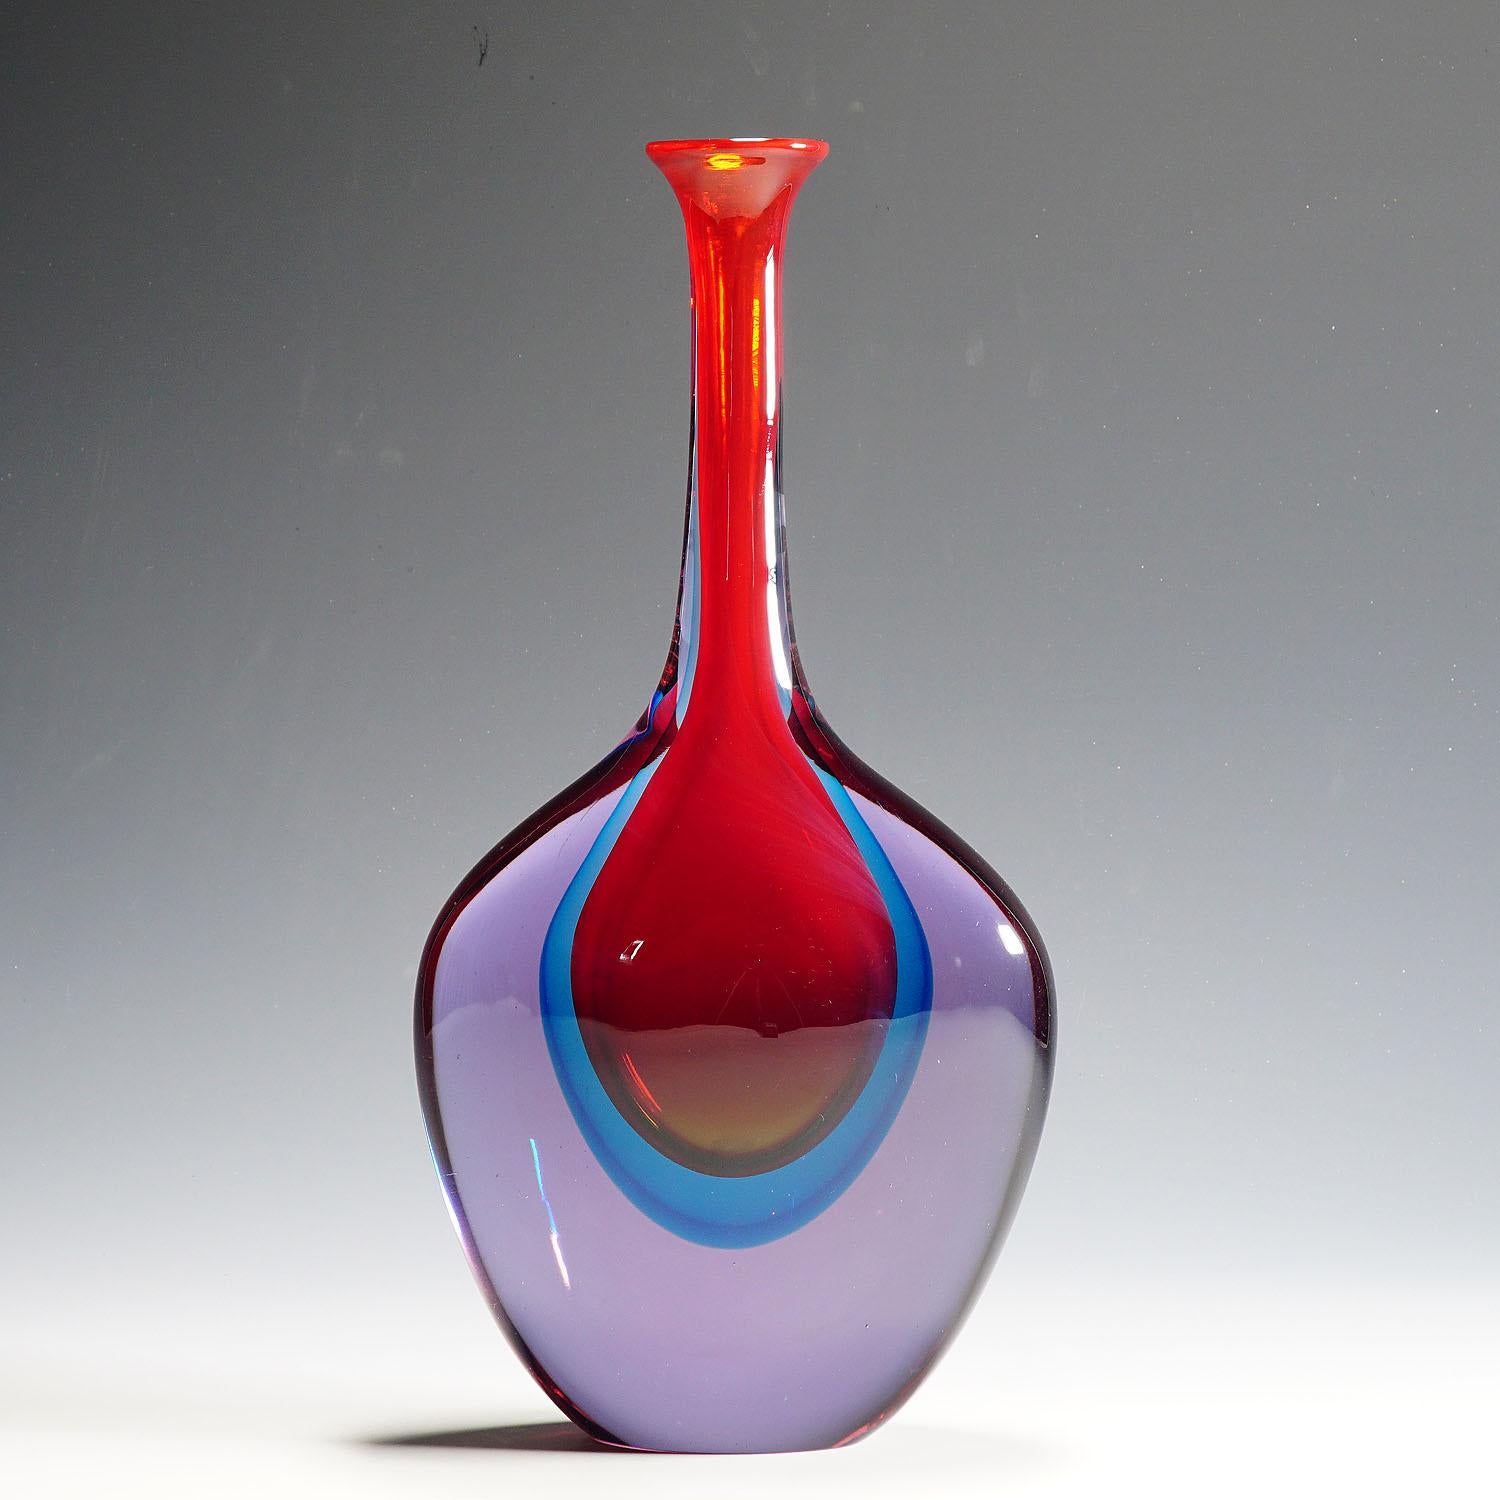 A large and heavy sommerso glass vase manufactured by Ars Cenedese and designed by Antonio Da Ros, Murano. Red and blue sommerso glass with a violett overlay. Incised signature 